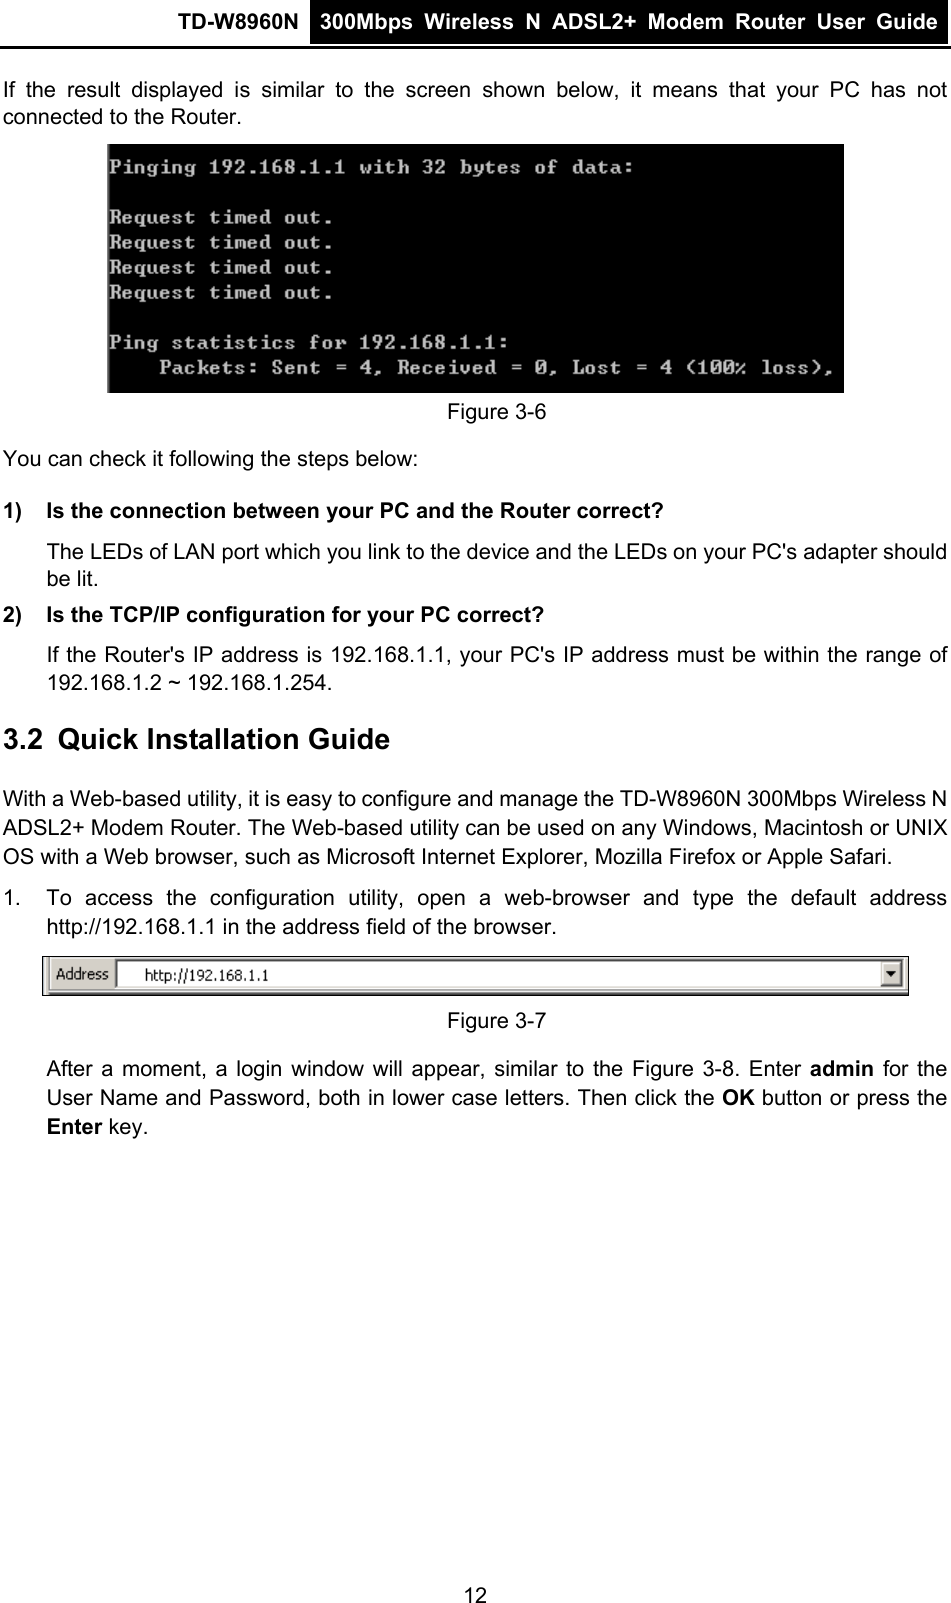 TD-W8960N  300Mbps Wireless N ADSL2+ Modem Router User Guide  If the result displayed is similar to the screen shown below, it means that your PC has not connected to the Router.  Figure 3-6 You can check it following the steps below: 1)  Is the connection between your PC and the Router correct? The LEDs of LAN port which you link to the device and the LEDs on your PC&apos;s adapter should be lit. 2)  Is the TCP/IP configuration for your PC correct? If the Router&apos;s IP address is 192.168.1.1, your PC&apos;s IP address must be within the range of 192.168.1.2 ~ 192.168.1.254. 3.2  Quick Installation Guide With a Web-based utility, it is easy to configure and manage the TD-W8960N 300Mbps Wireless N ADSL2+ Modem Router. The Web-based utility can be used on any Windows, Macintosh or UNIX OS with a Web browser, such as Microsoft Internet Explorer, Mozilla Firefox or Apple Safari. 1.  To access the configuration utility, open a web-browser and type the default address http://192.168.1.1 in the address field of the browser.  Figure 3-7 After a moment, a login window will appear, similar to the Figure 3-8. Enter admin  for the User Name and Password, both in lower case letters. Then click the OK button or press the Enter key. 12 